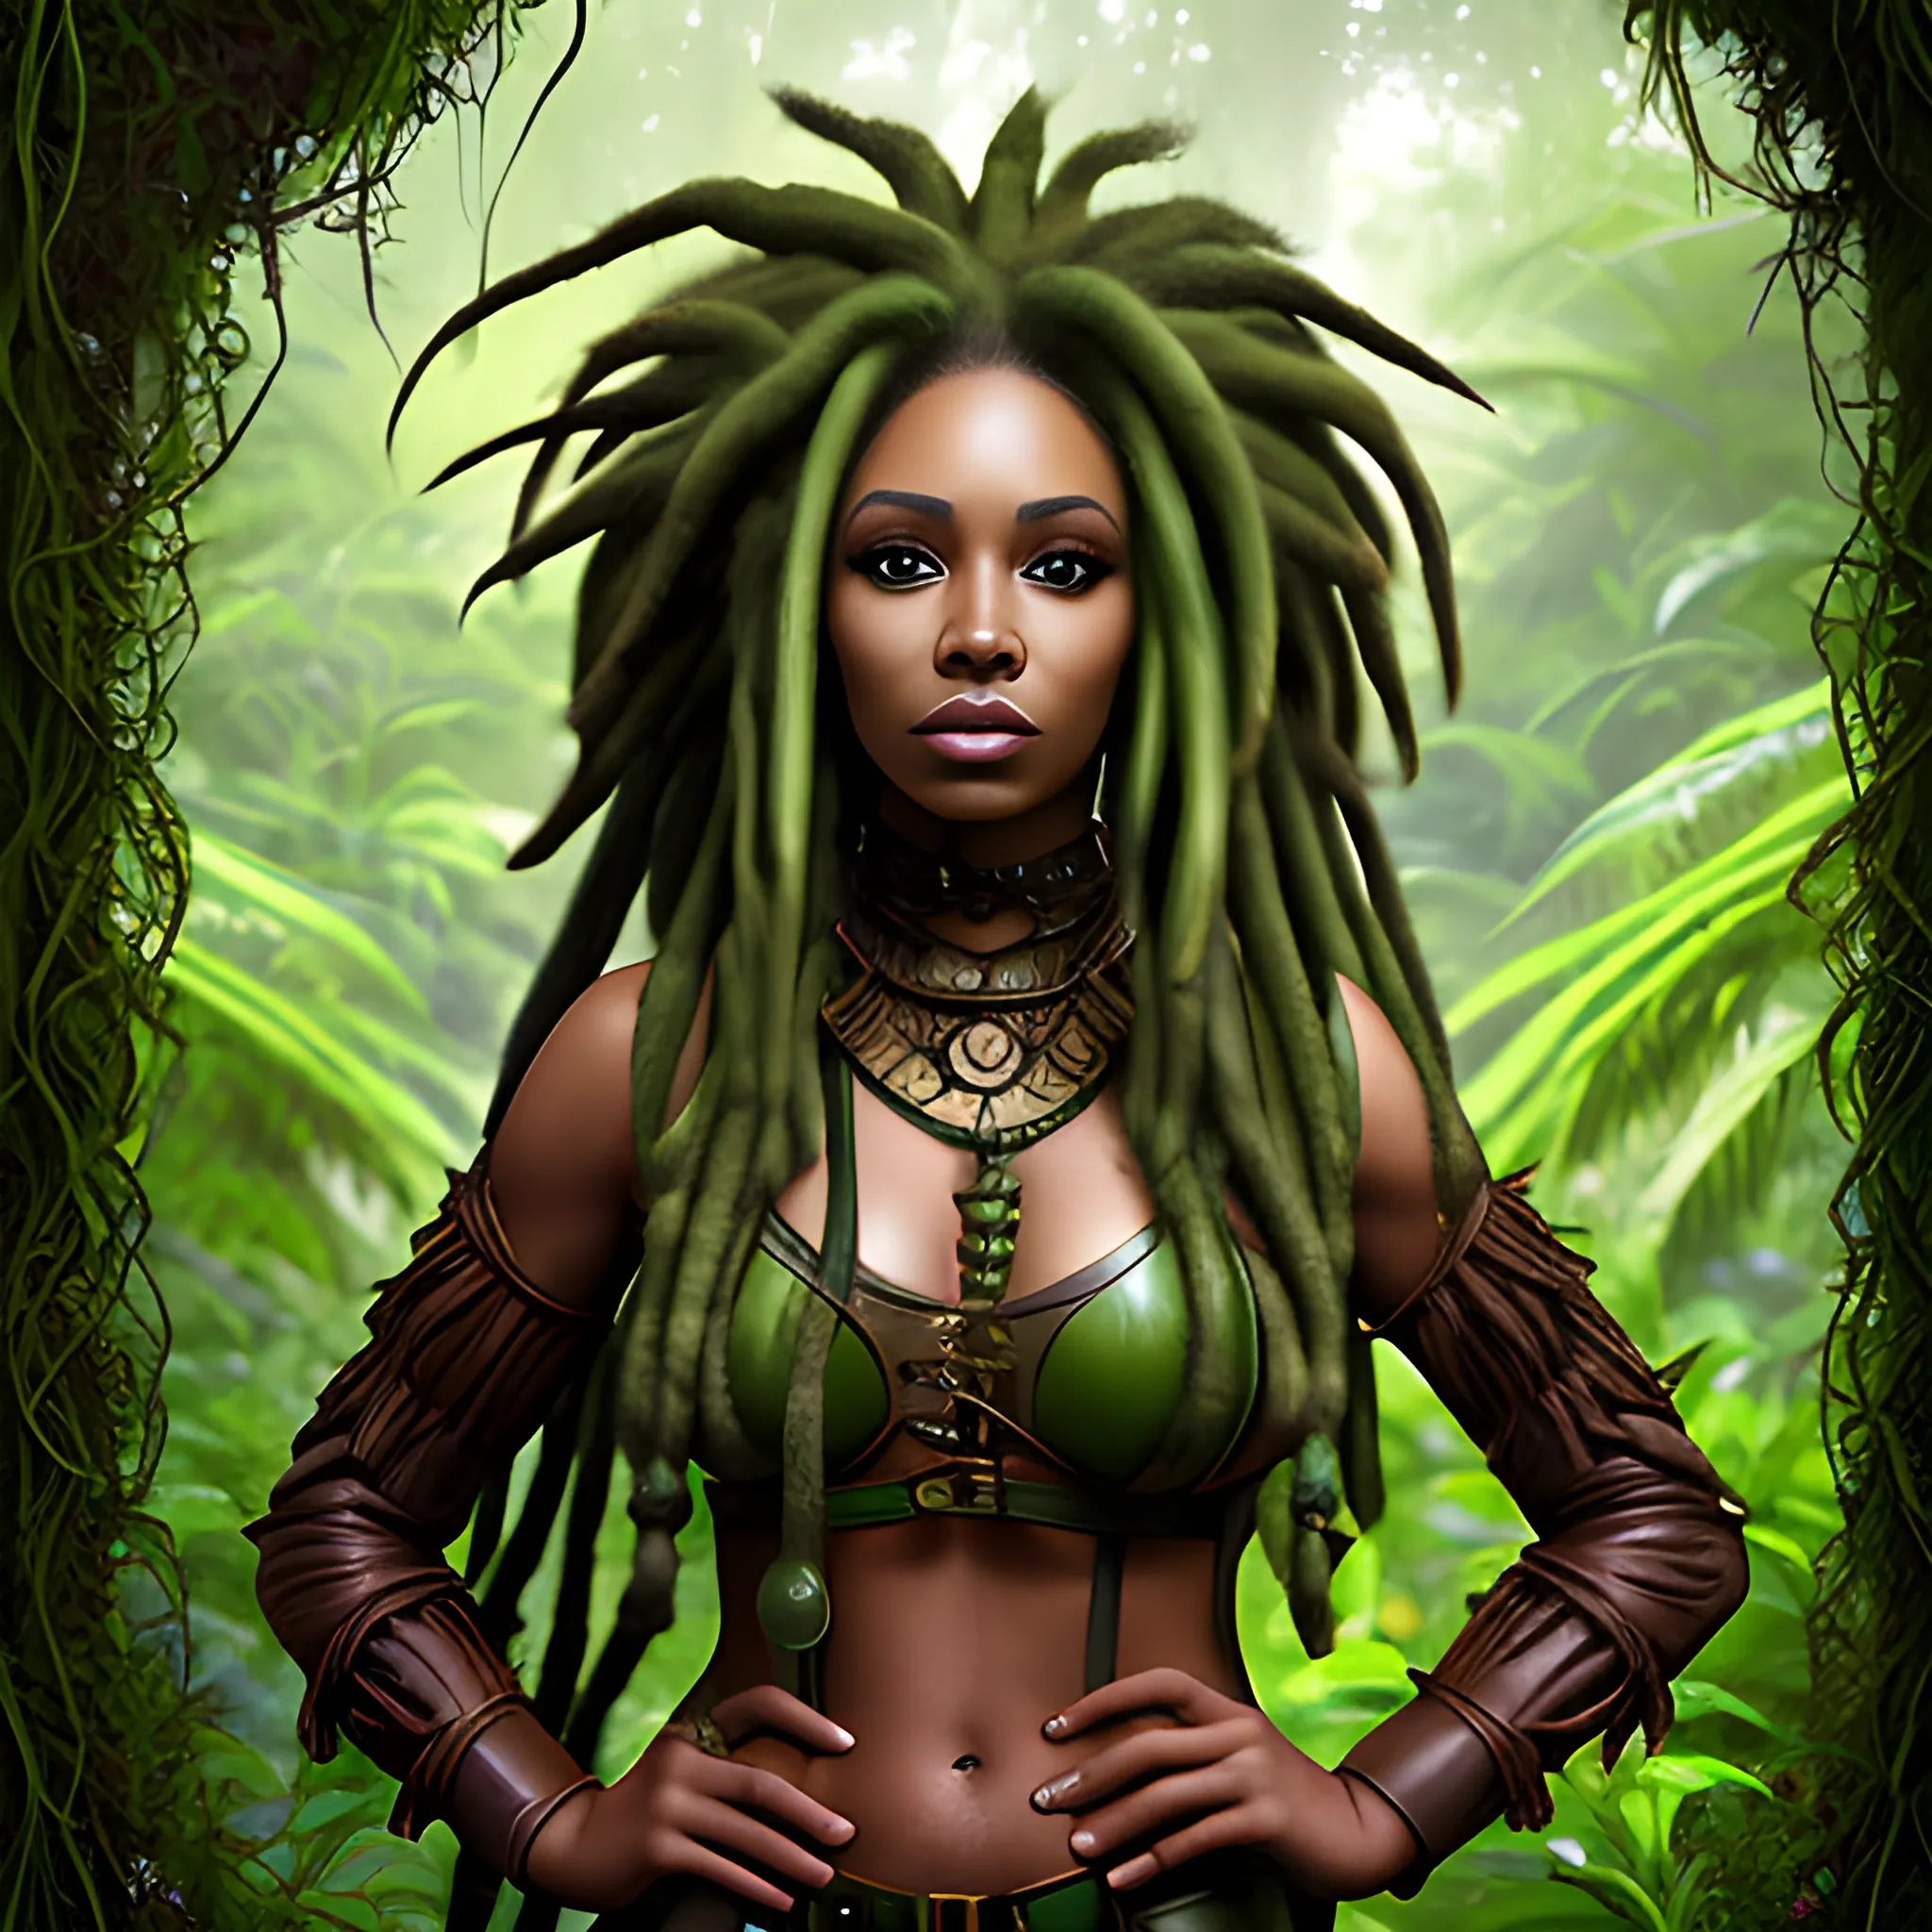 Fantasy human portrait of a woman with brown skin. Green hair made of vines in dreadlocks. Jungle forest background. Leather druid clothing.